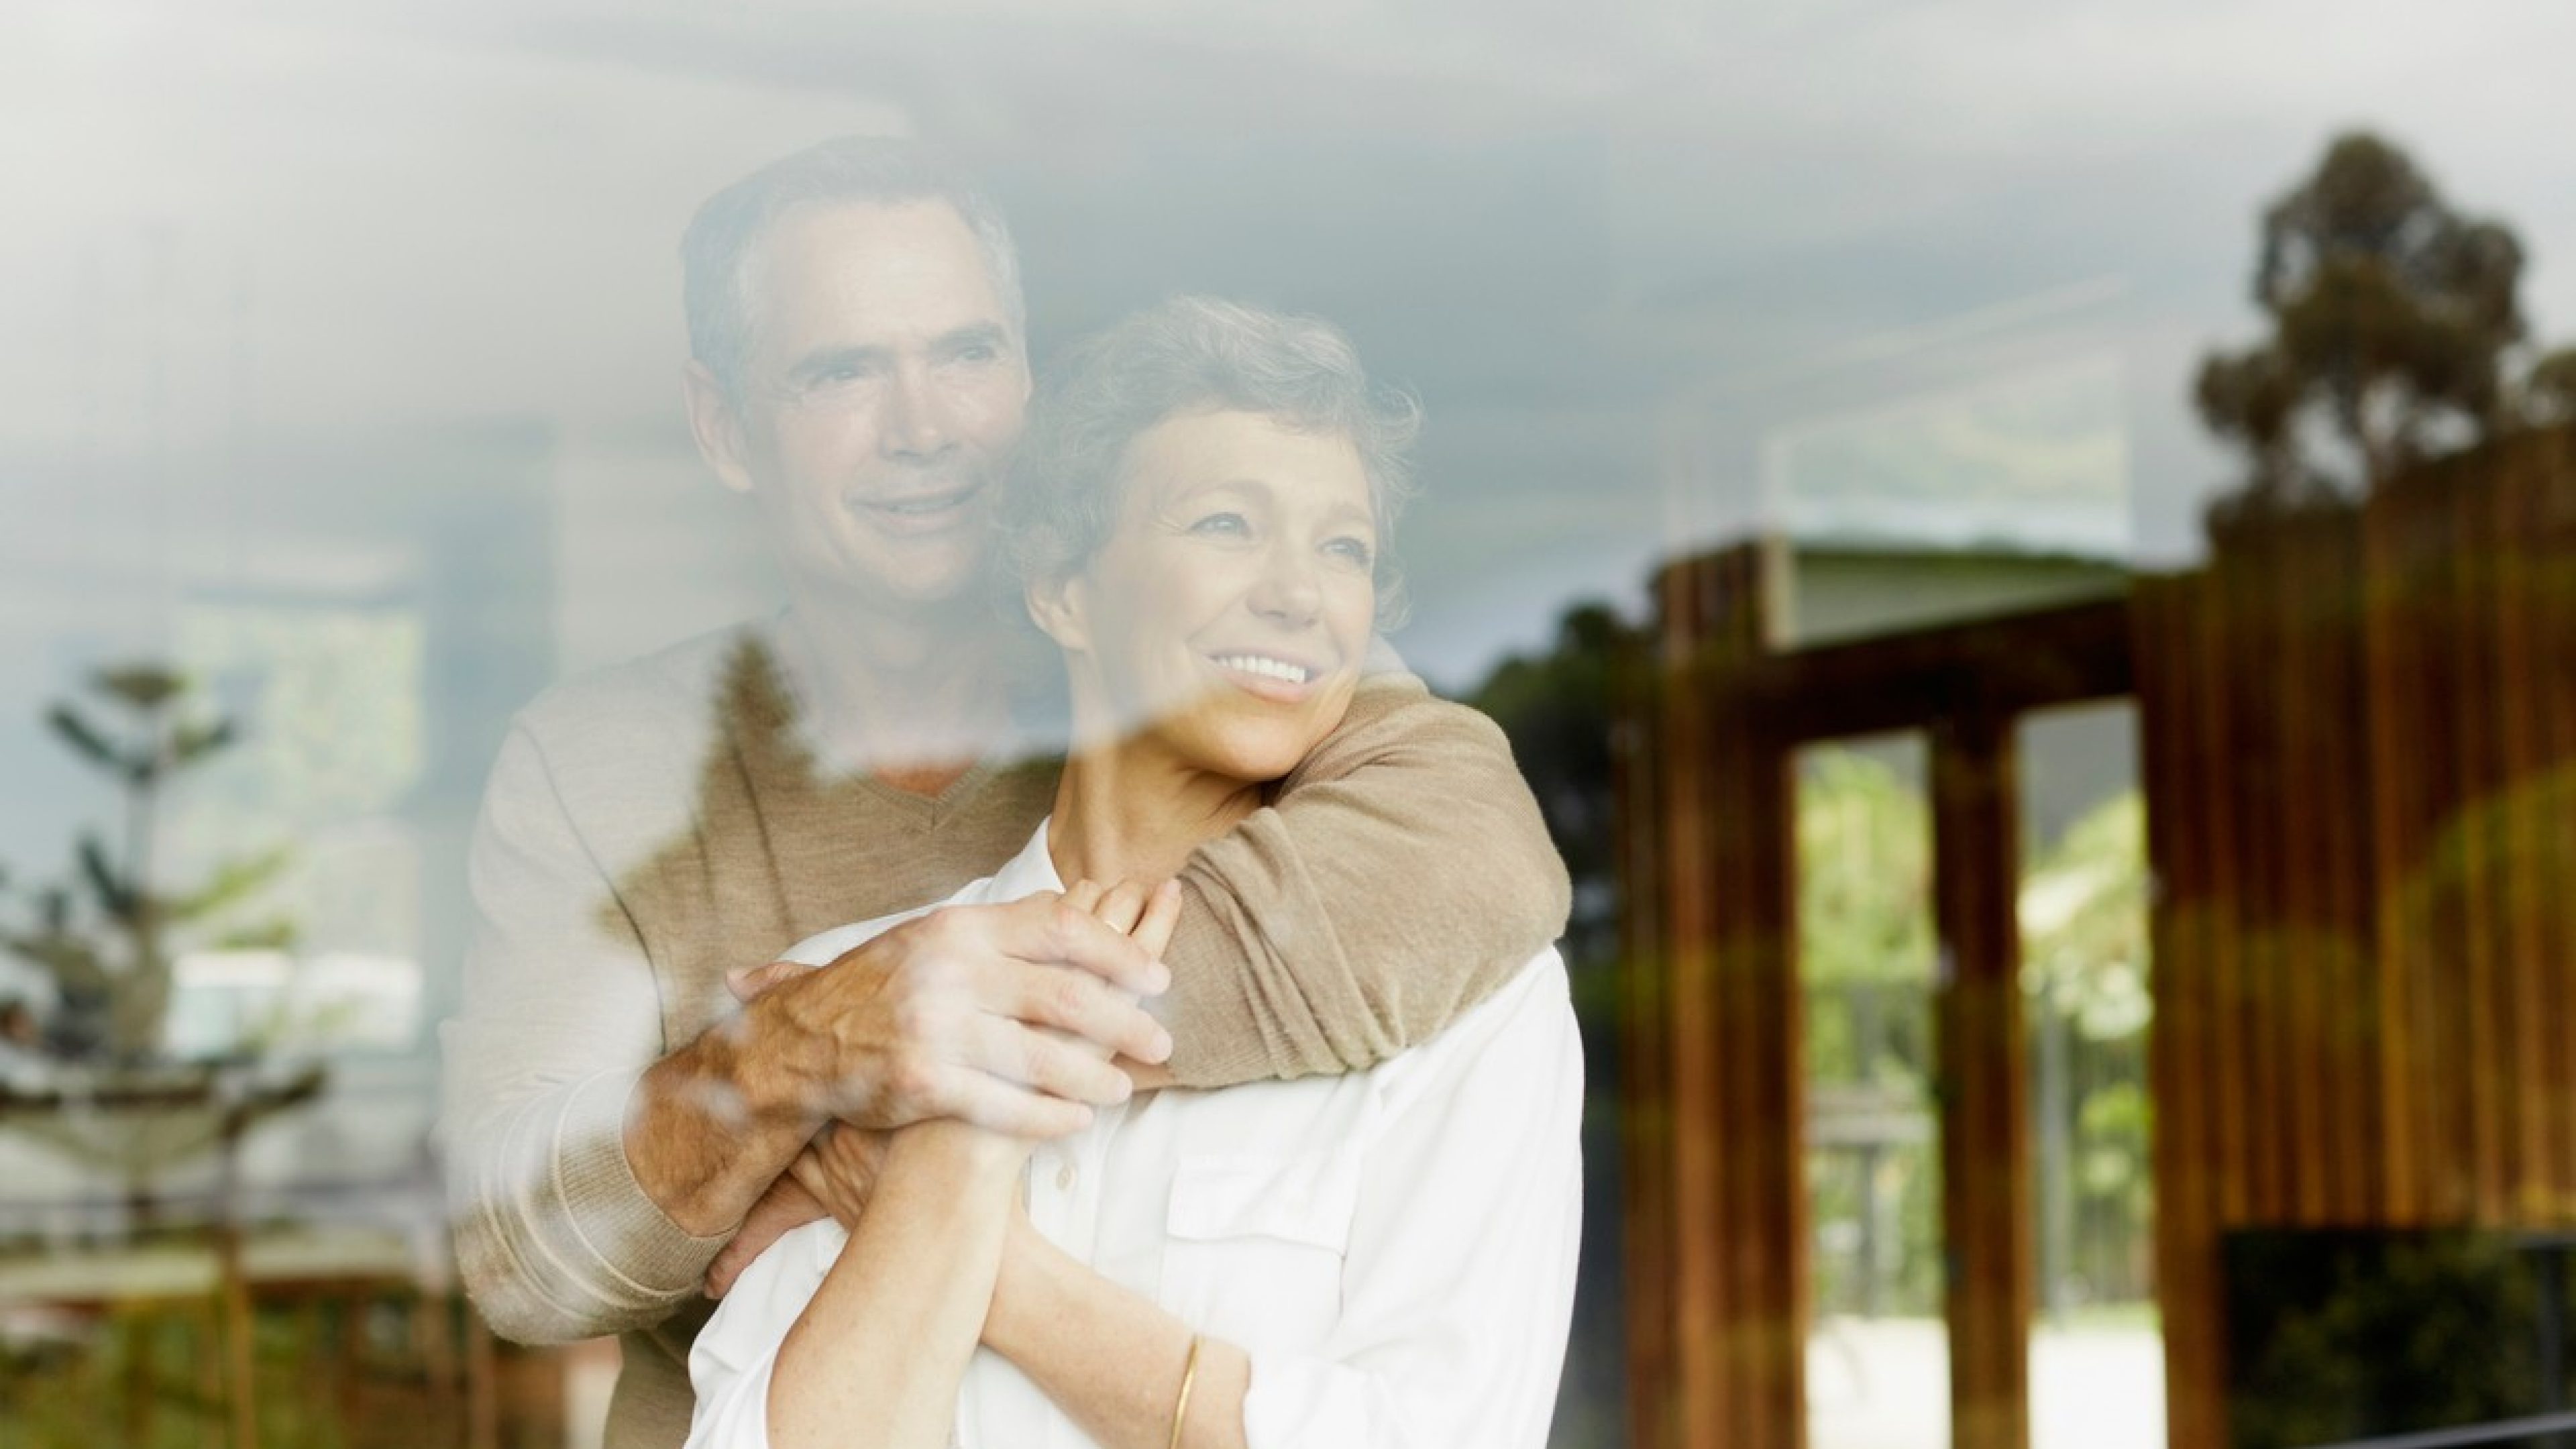 A couple in their mid-50s stands behind a windowpane hugging each other and looking out of the window. The colours are warm. The man is wearing a beige sweater, the woman a white blouse. Both are smiling and looking through the window into the distance.